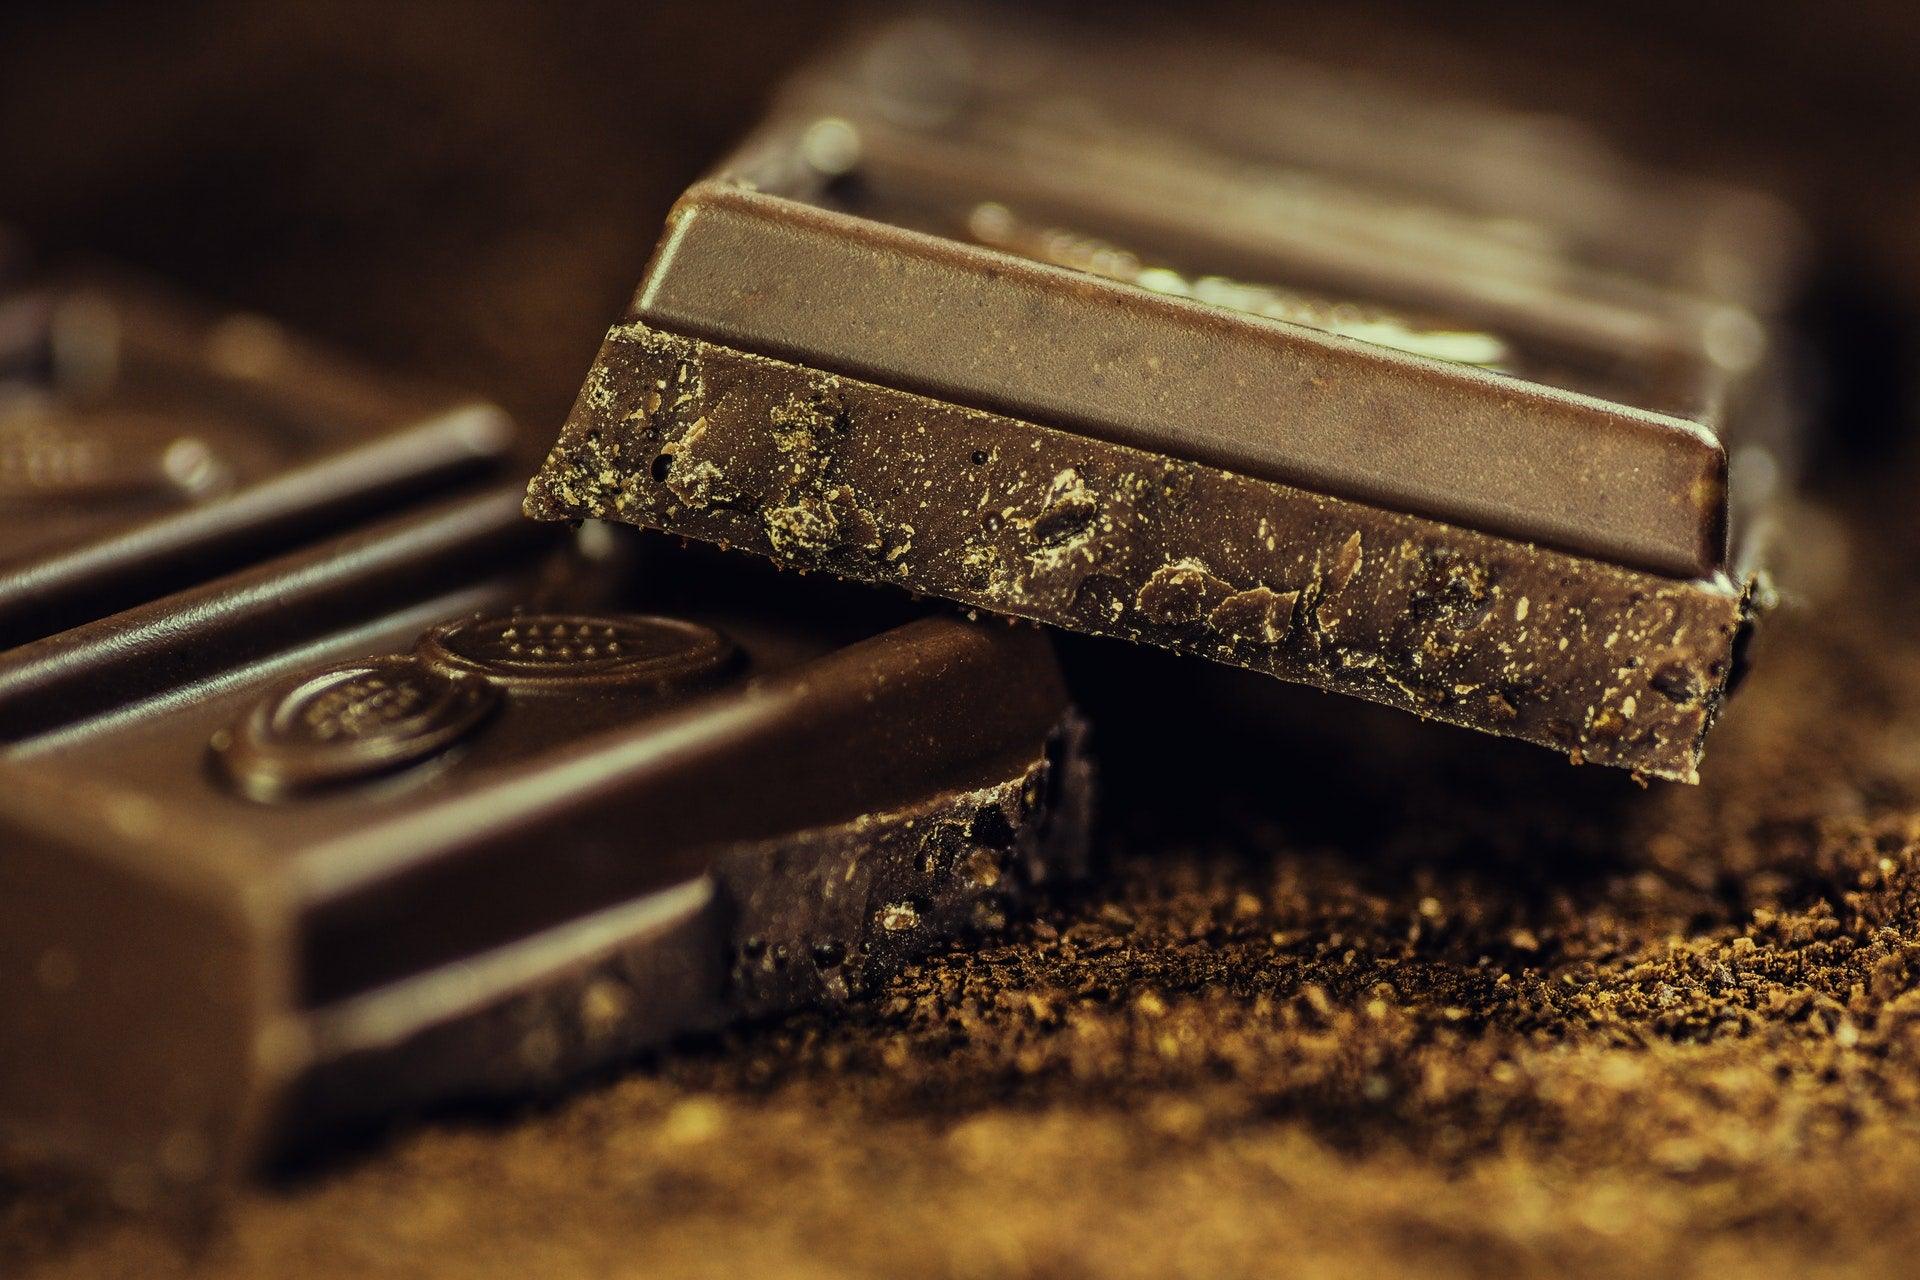 A sweet tooth or a mineral deficiency? Why regularly reaching for the chocolate may be a sign of a Magnesium deficiency - Nature Provides